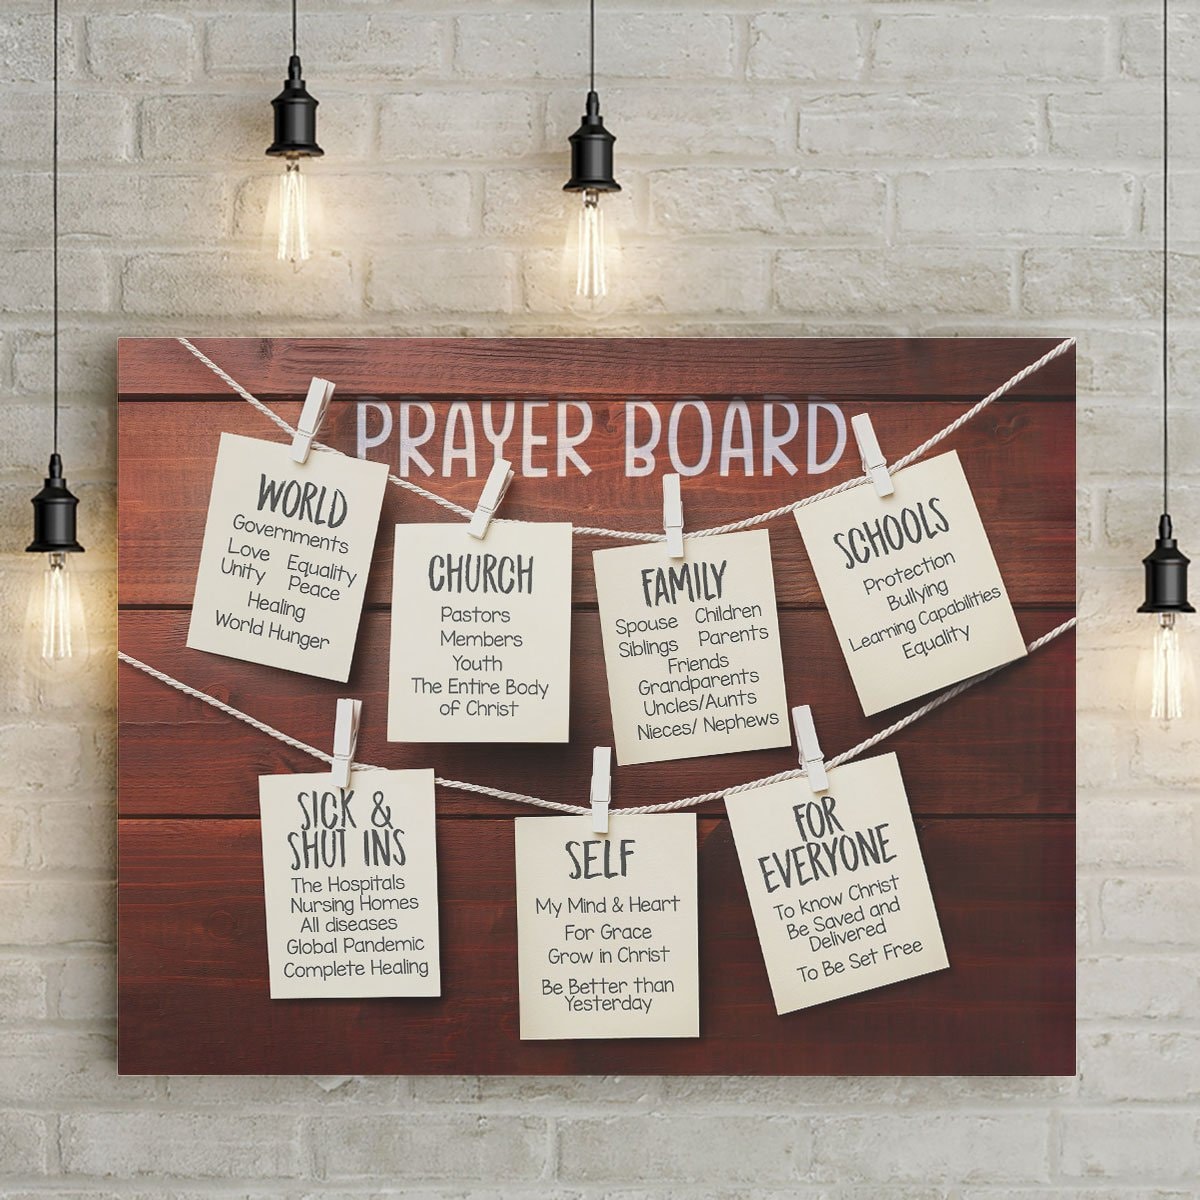 How to Make Your Own Prayer Board + Prayer Board Ideas - Out Upon the Waters